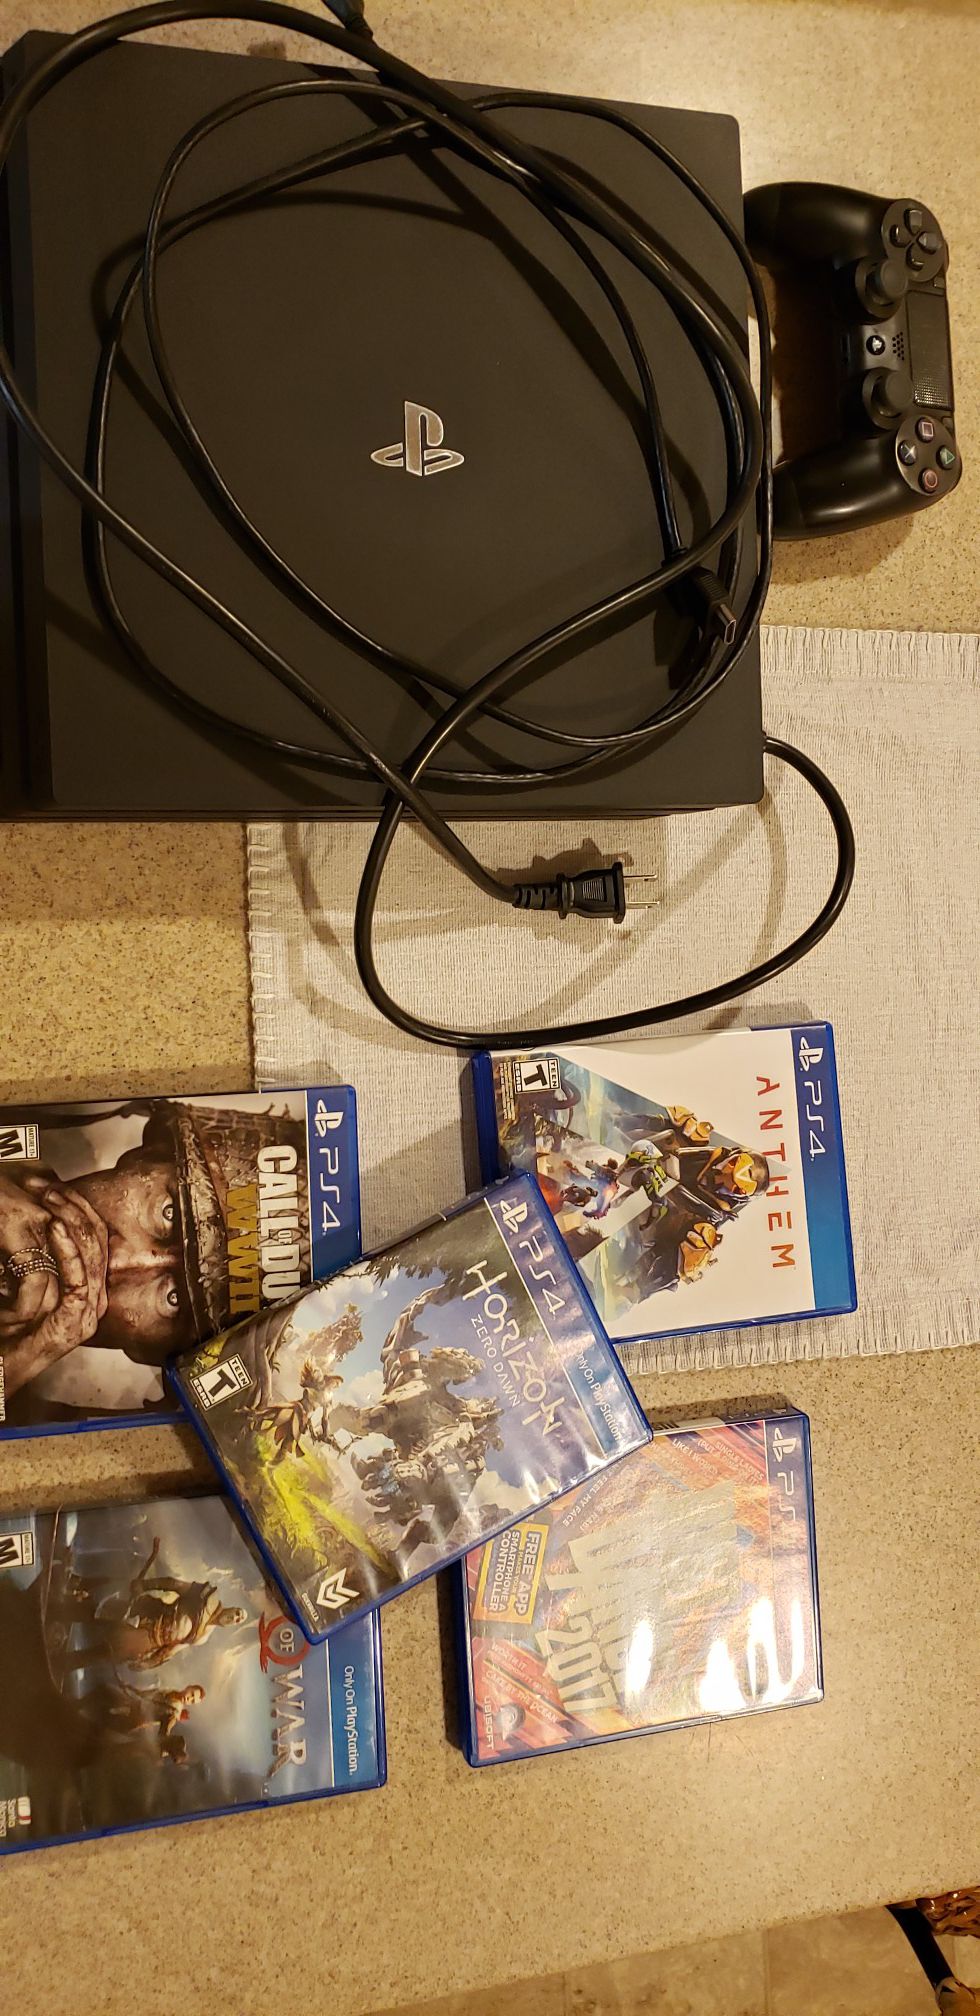 PS4 Pro with games